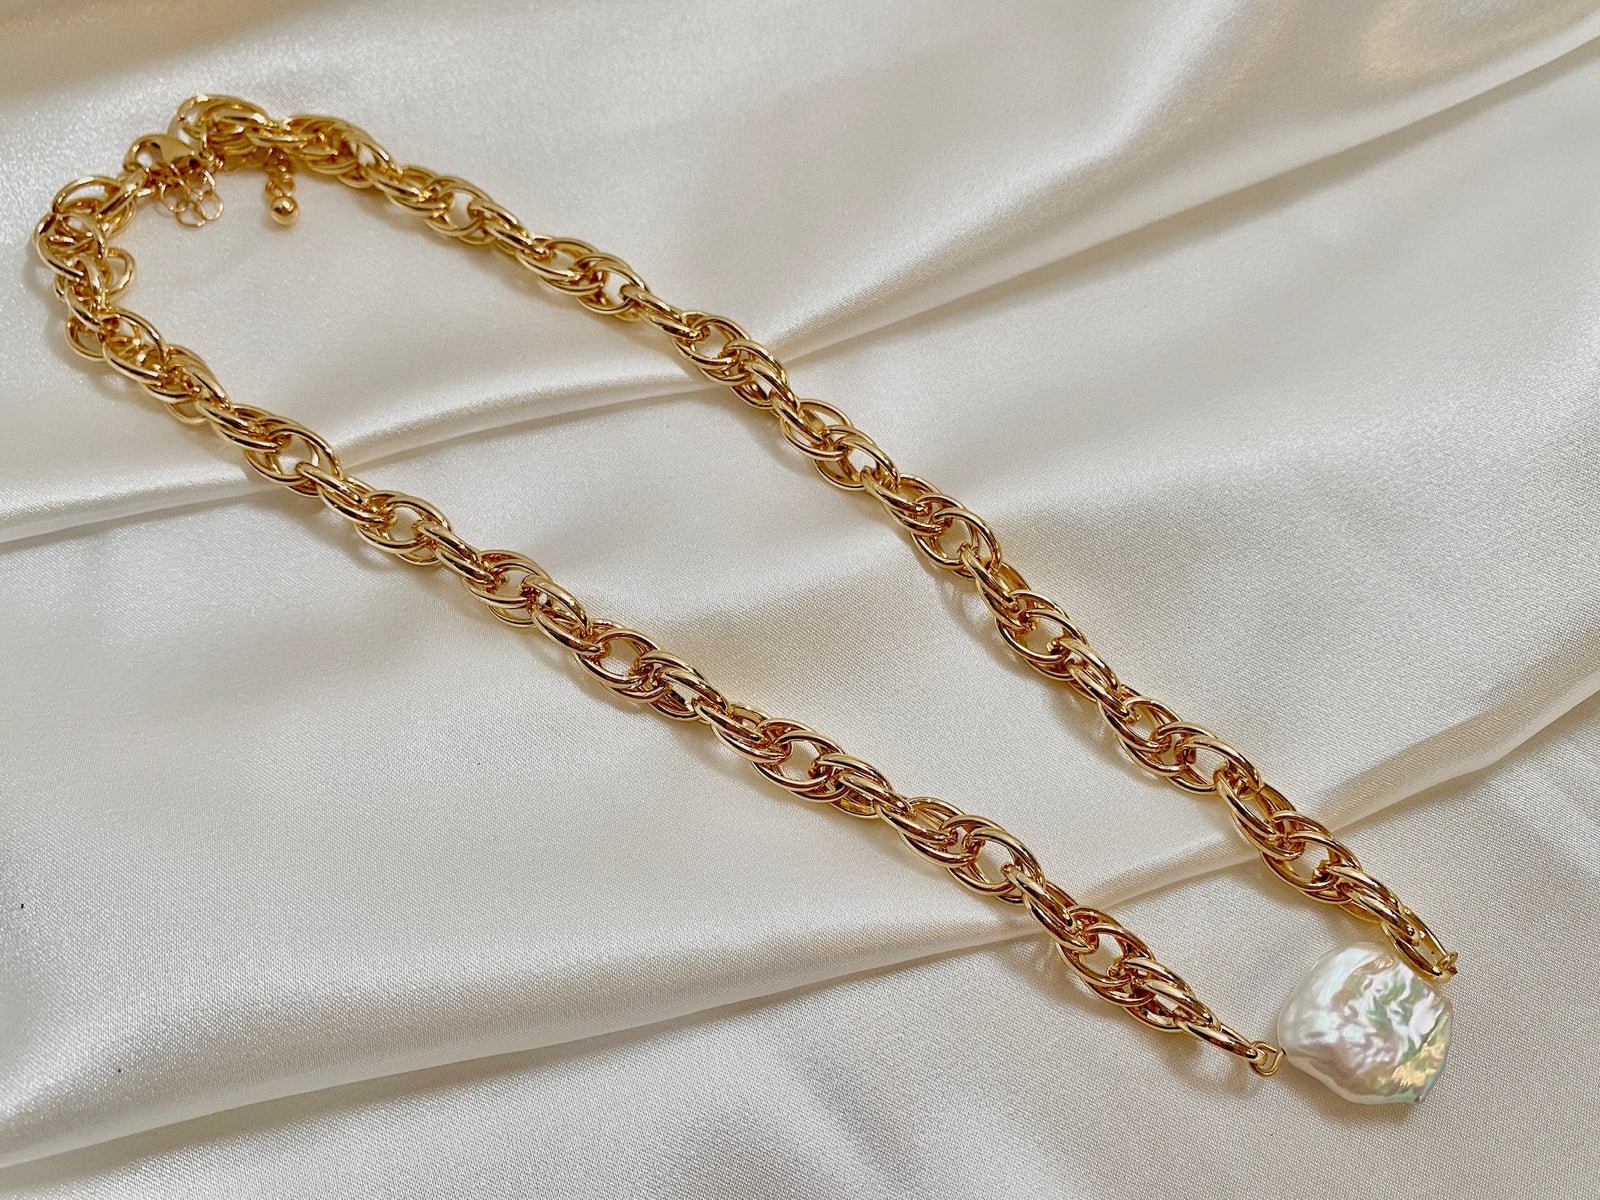 Reya Necklace - All Good Laces